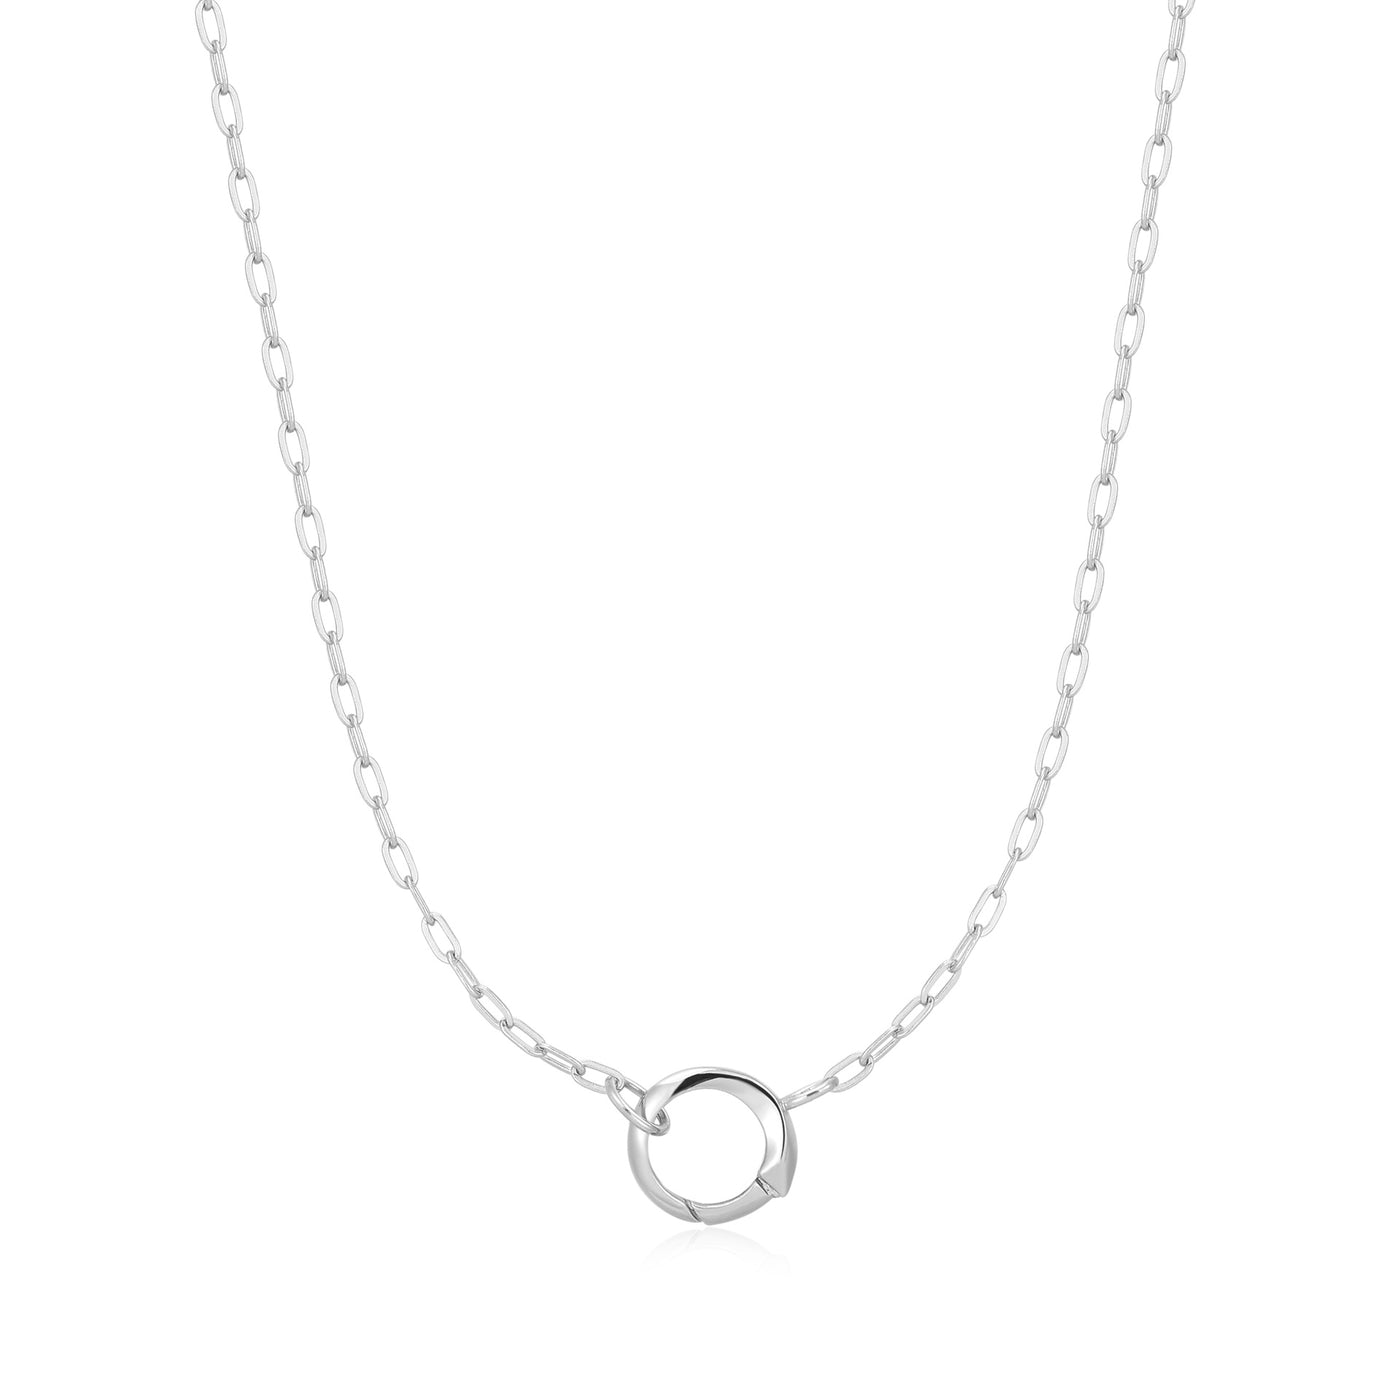 Pop Charms - Silver Mini Link Charm Chain Connector Necklace